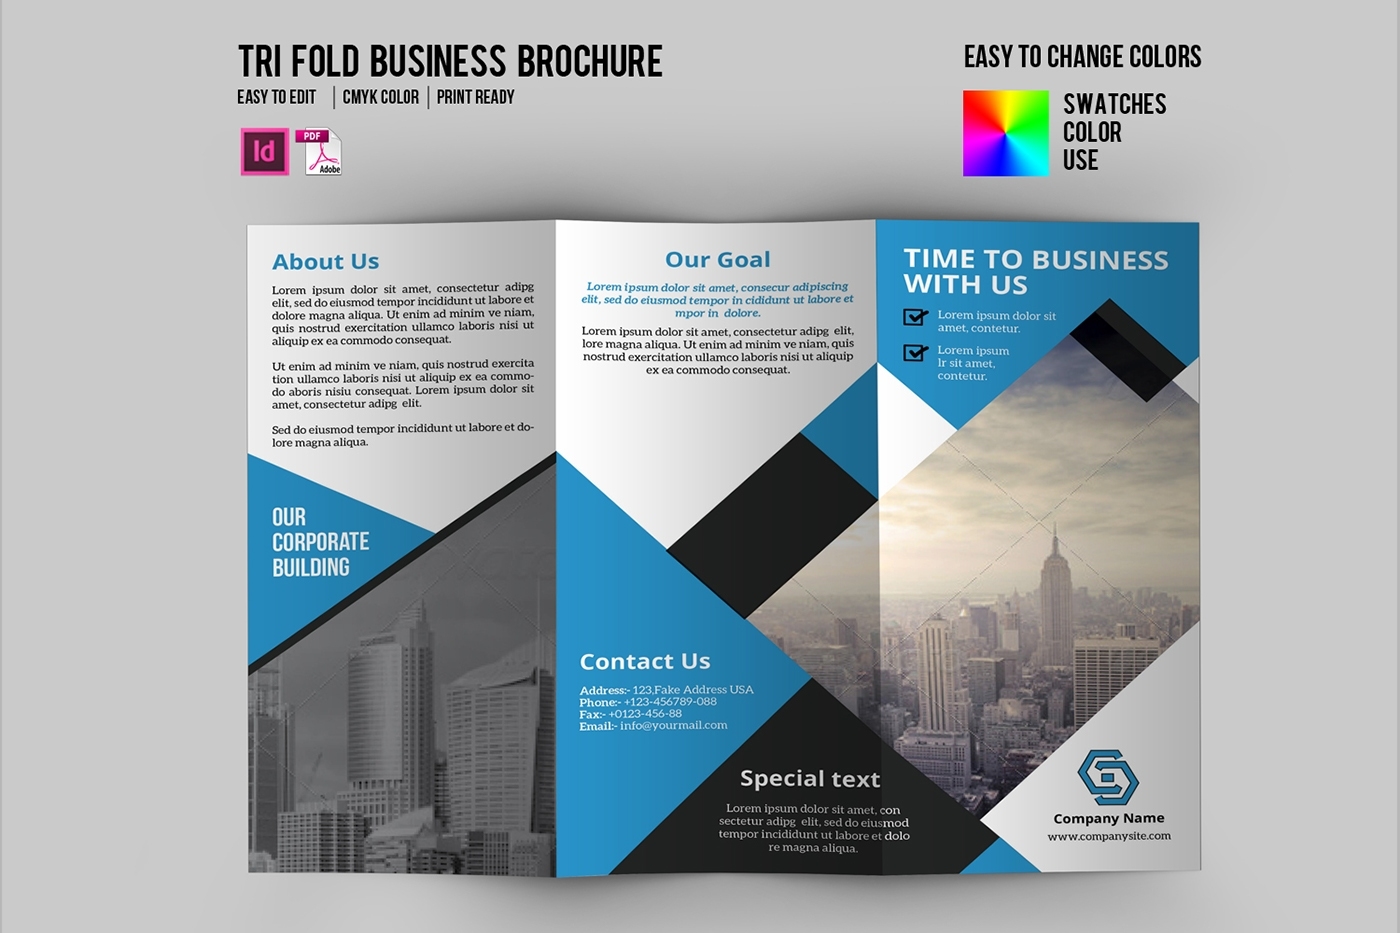 Indesign Business Brochure On Behance Within Brochure Templates Free Download Indesign